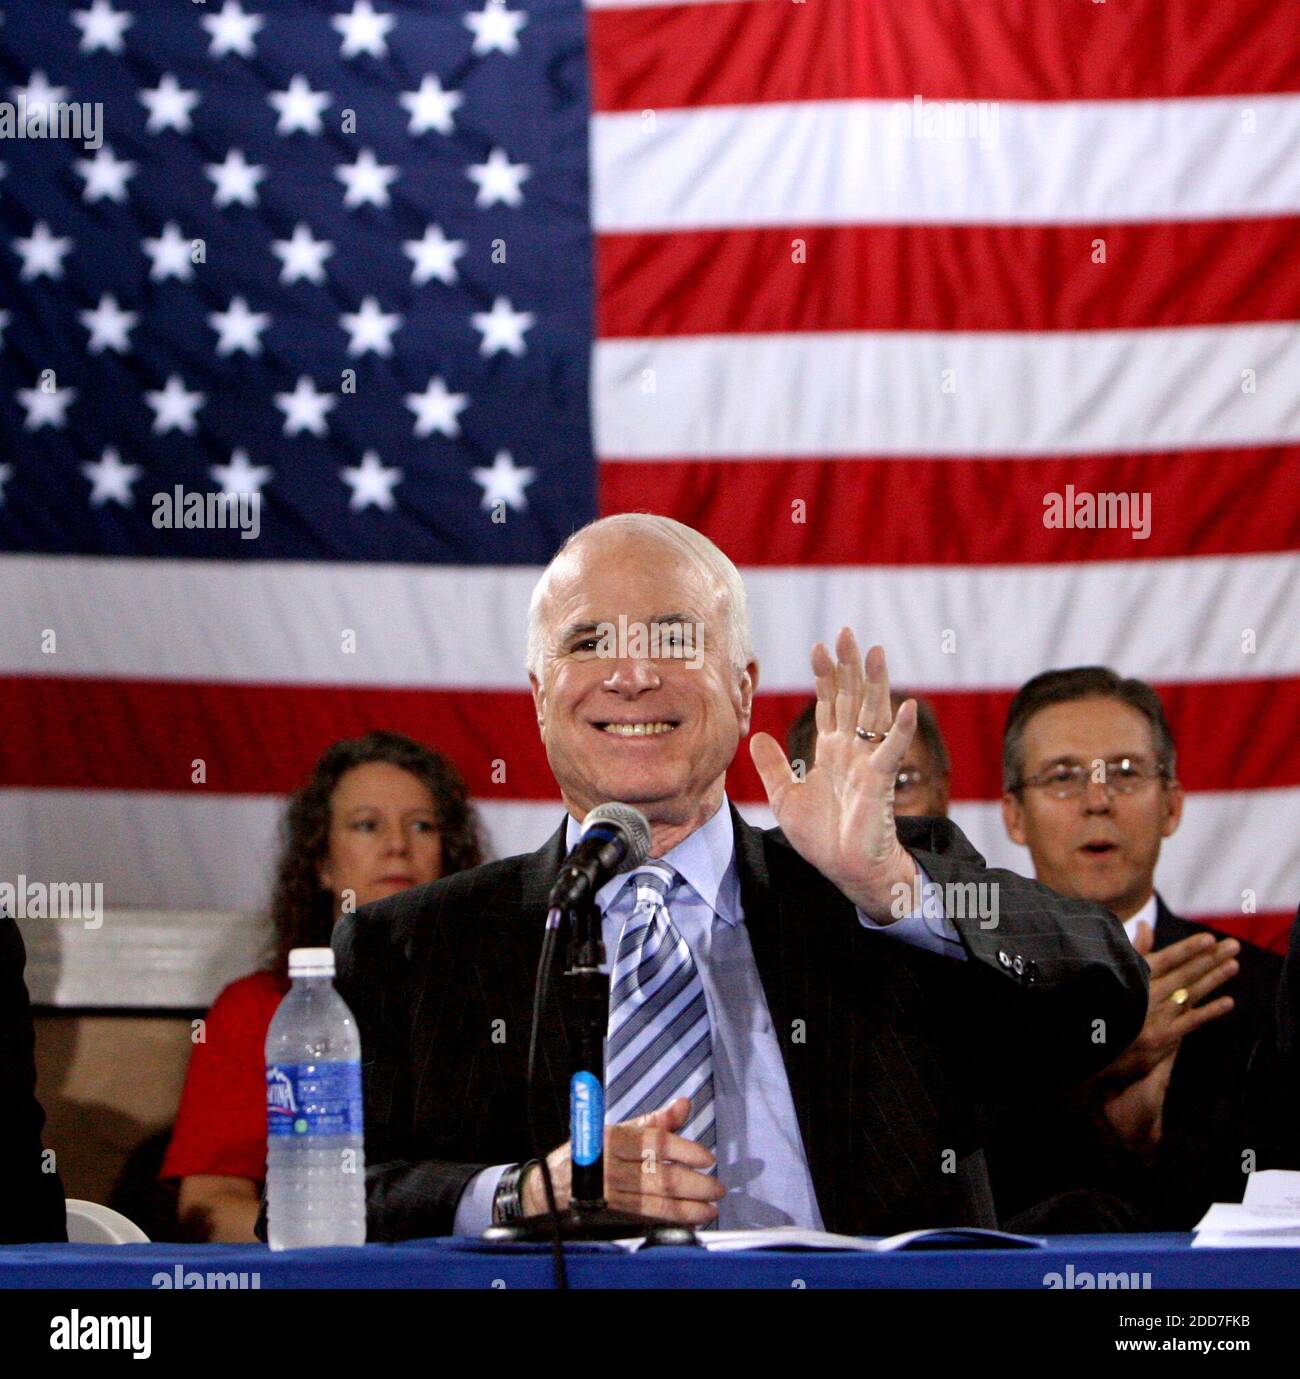 Republican presidential contender Sen. John McCain waves as he introduced at a roundtable discussion with community, business and elected leaders at Baker Manufacturing in Orlando, FL, USA on January 23, 2008. Photo by Joe Burbank/Orlando Sentinel/MCT/ABACAPRESS.COM Stock Photo